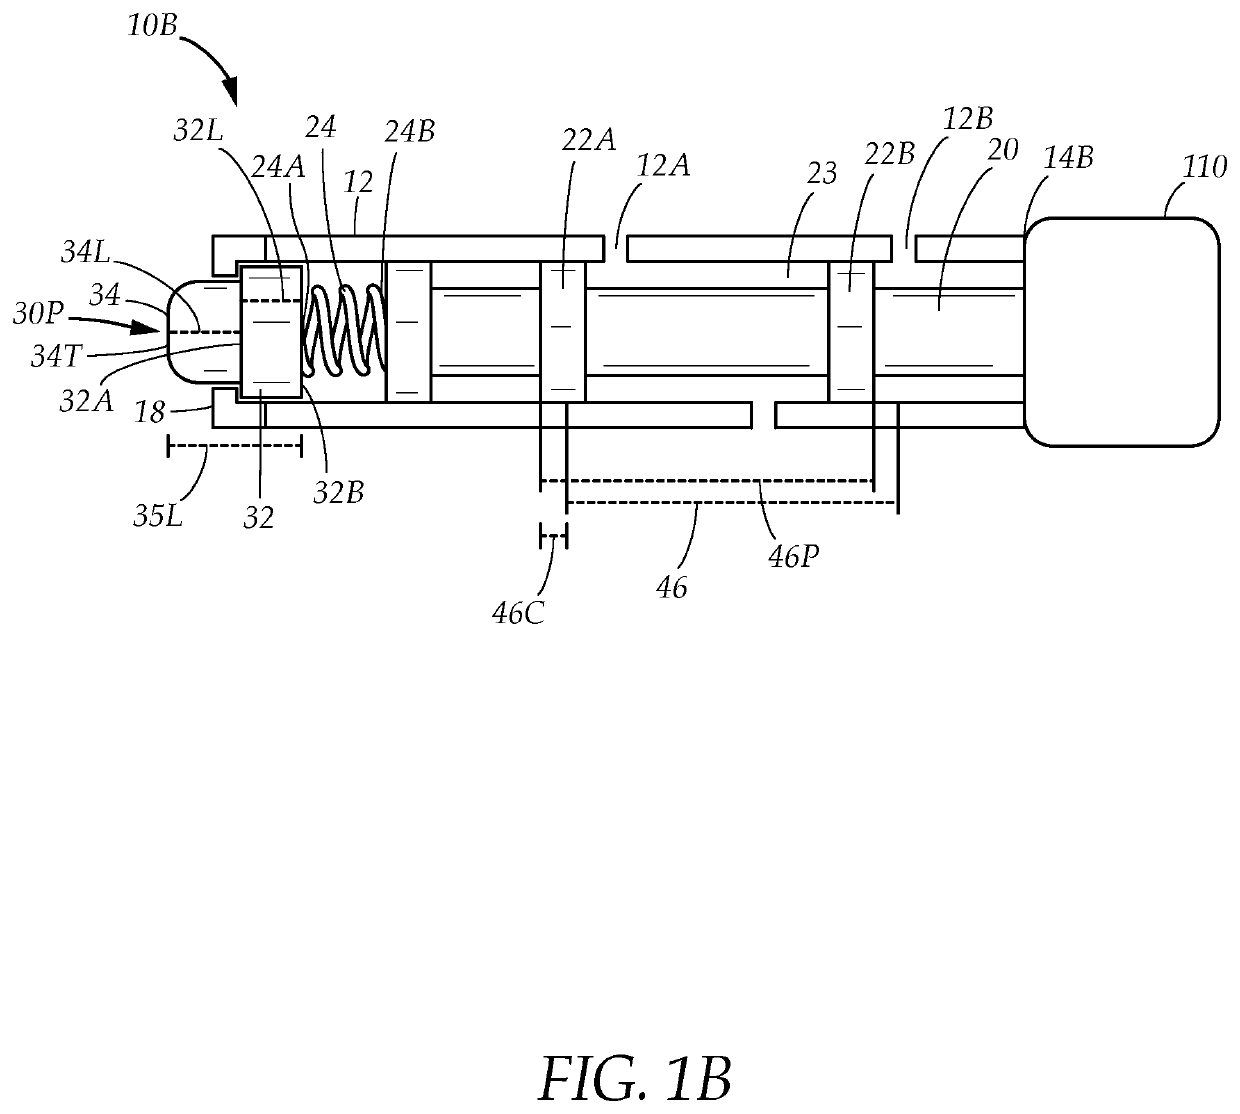 Turbocharger control valve for retaining back pressure and maintaining boost pressure